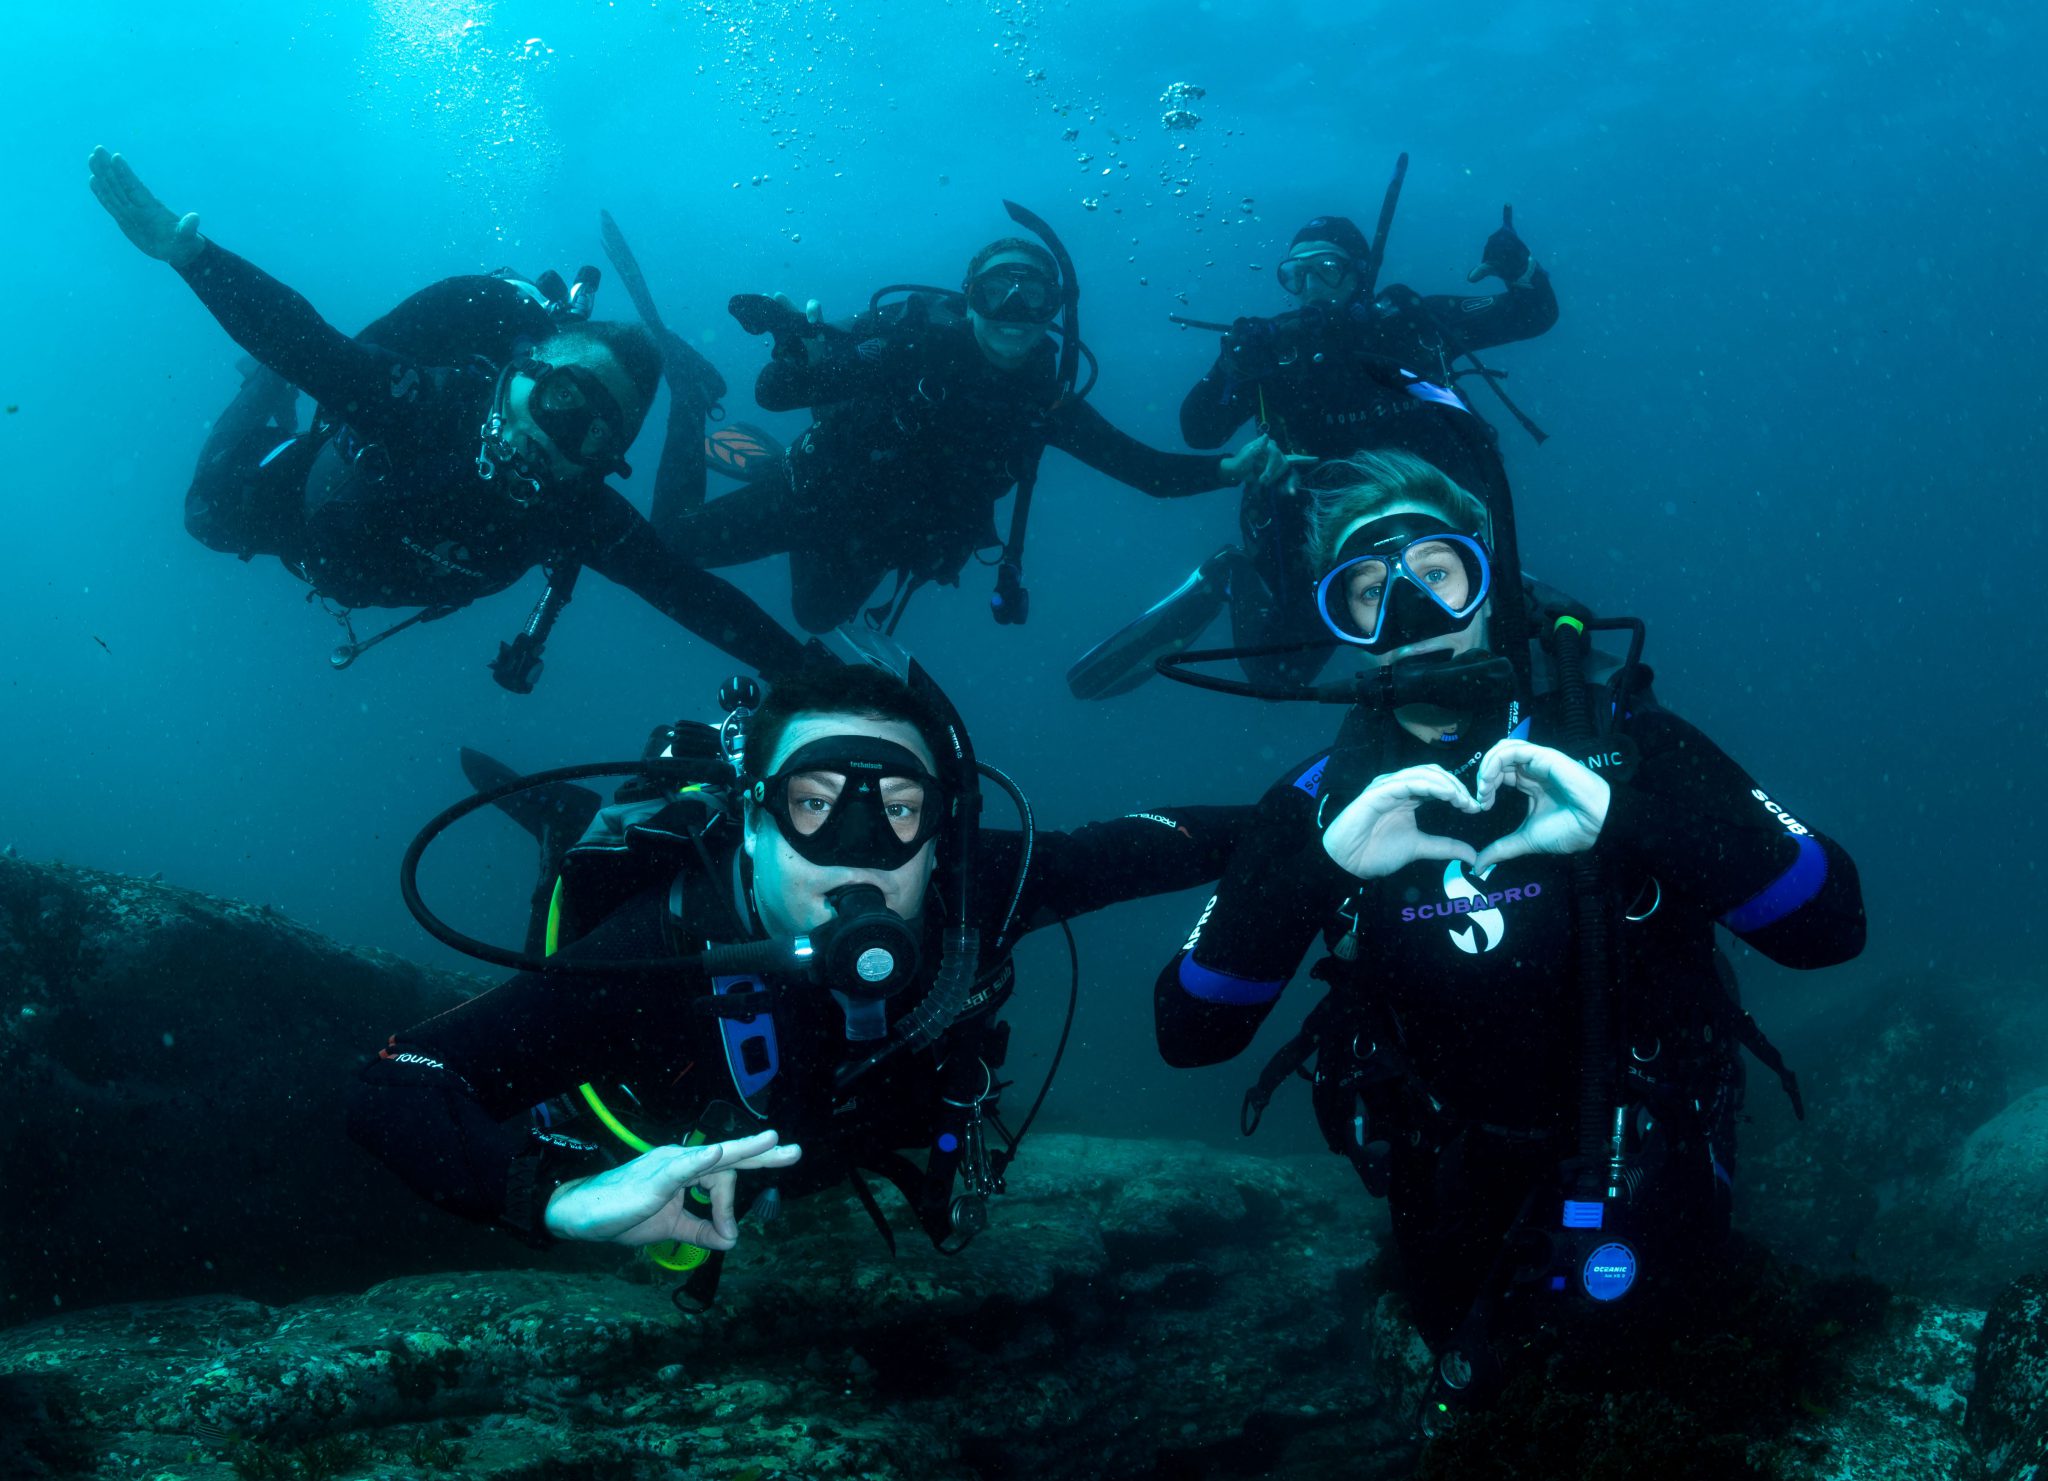 friends on a dive trip - how to find dive buddies